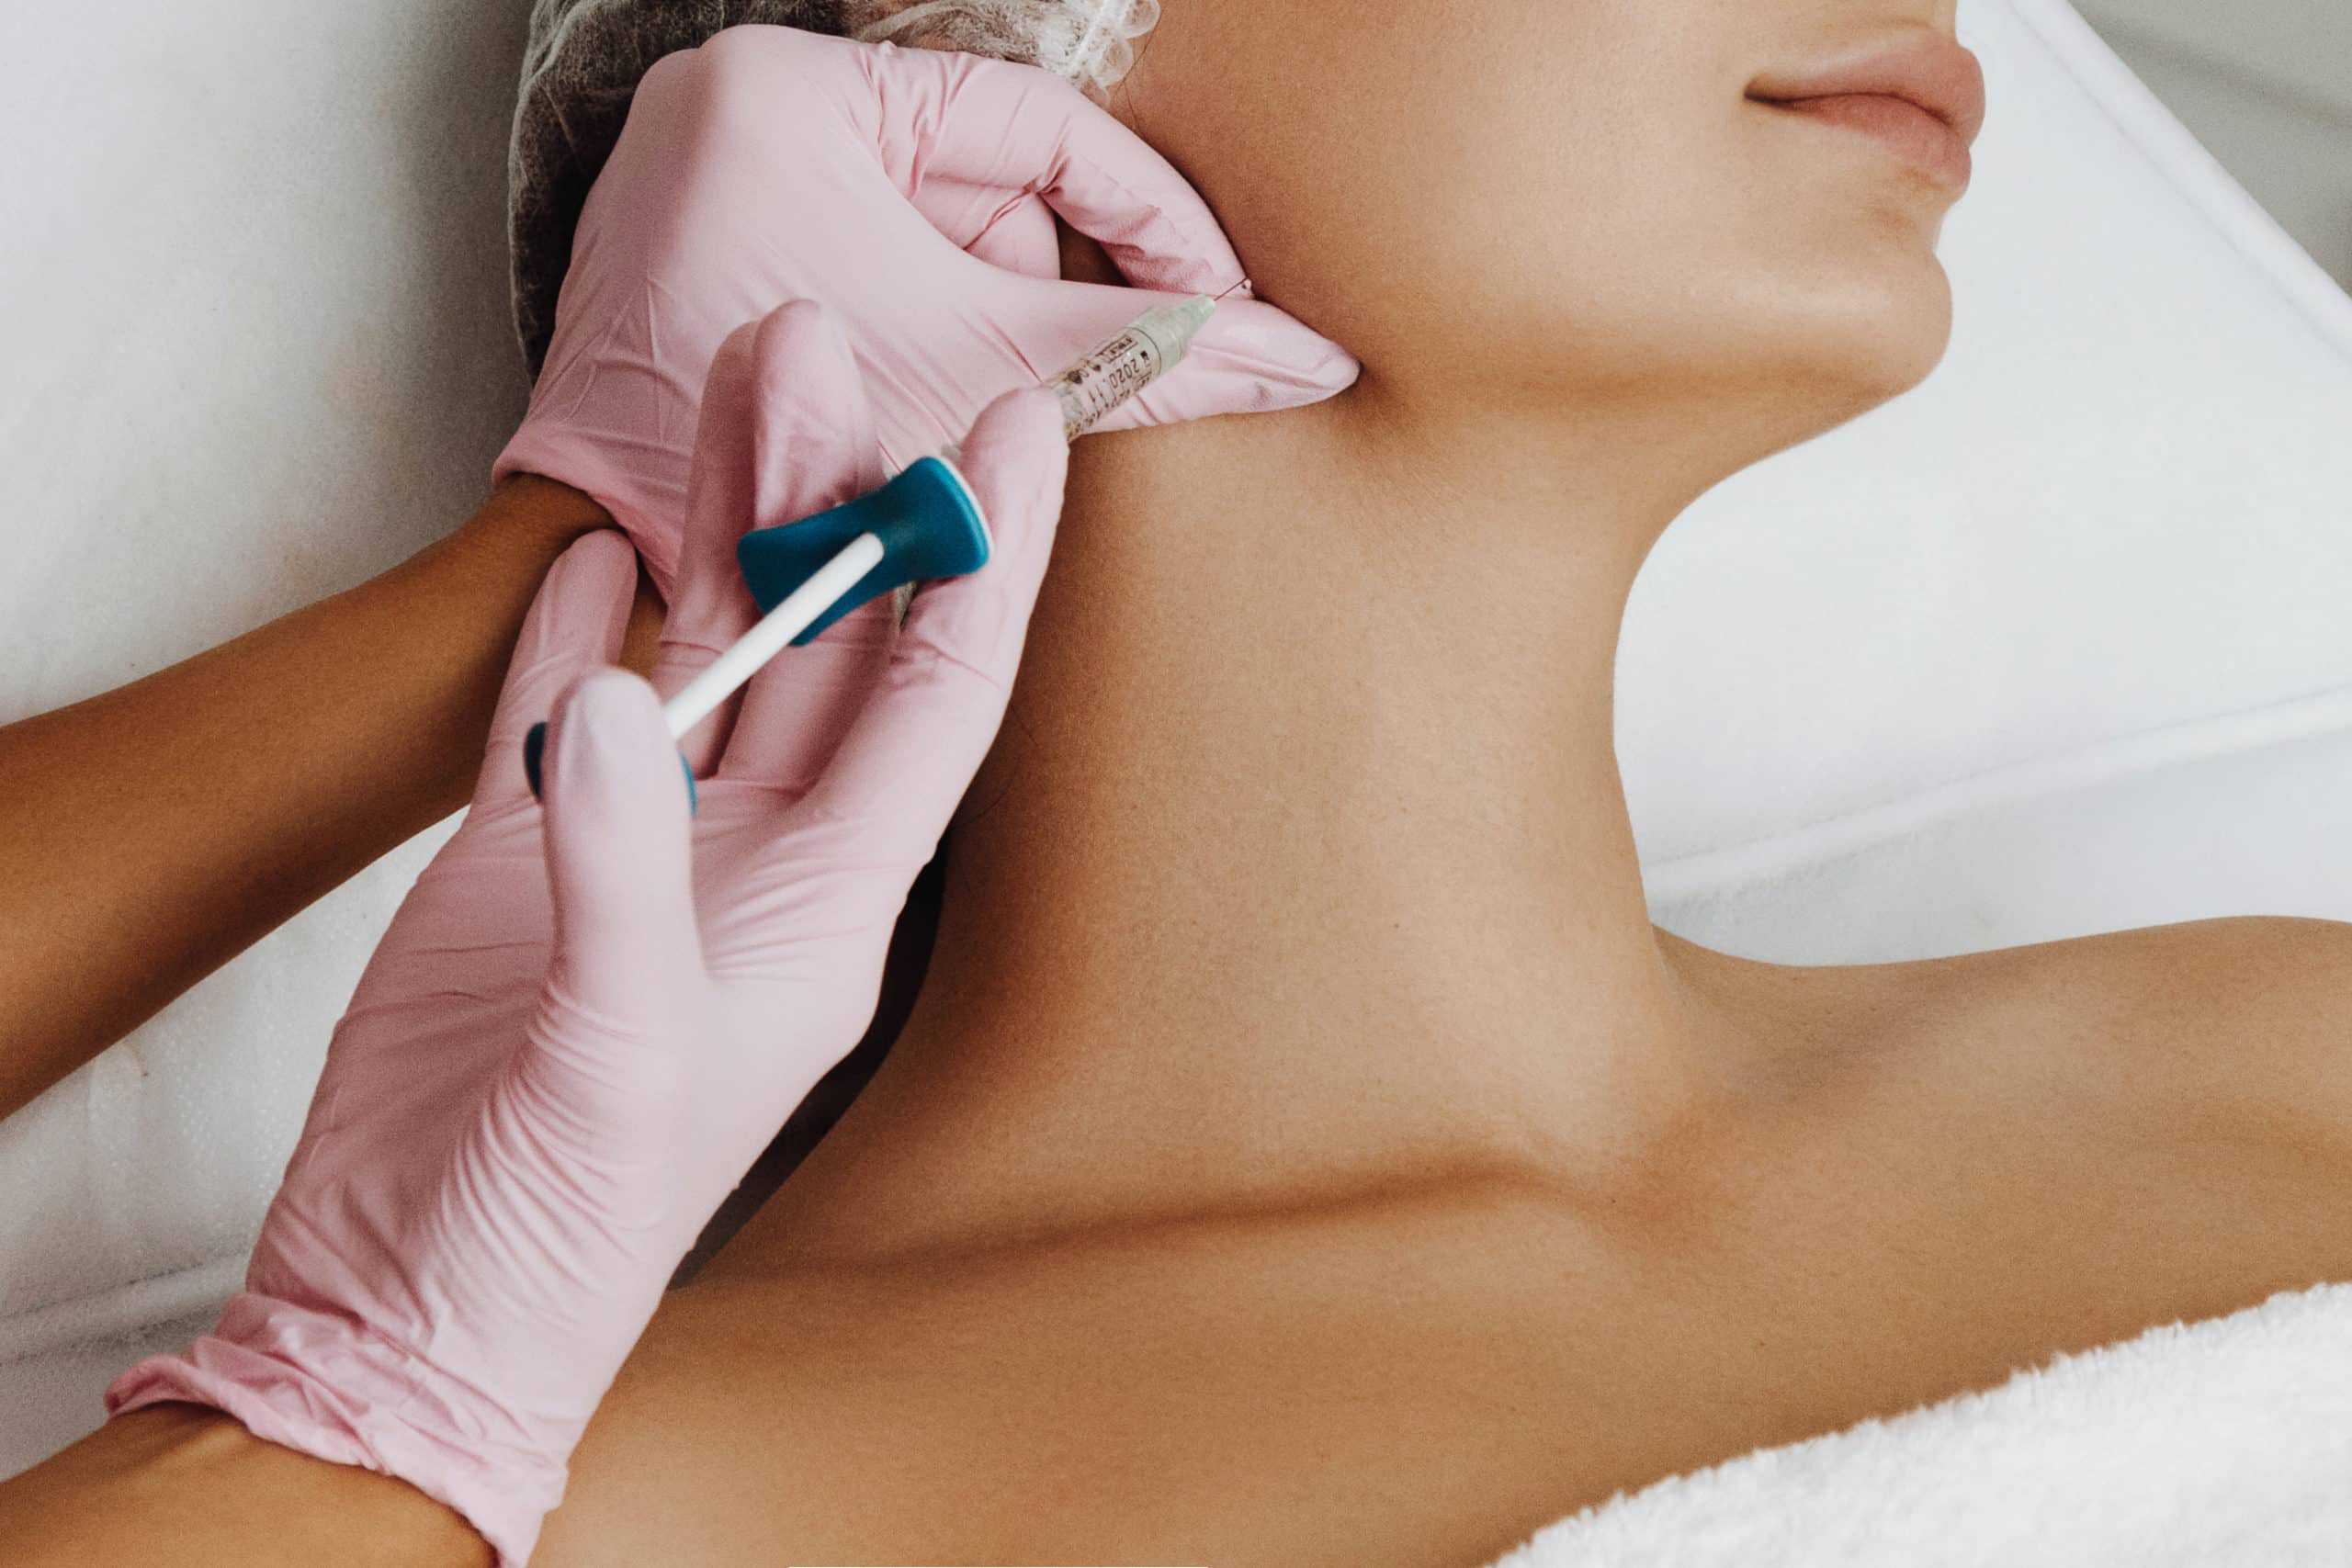 Which is better, Botox or dermal fillers